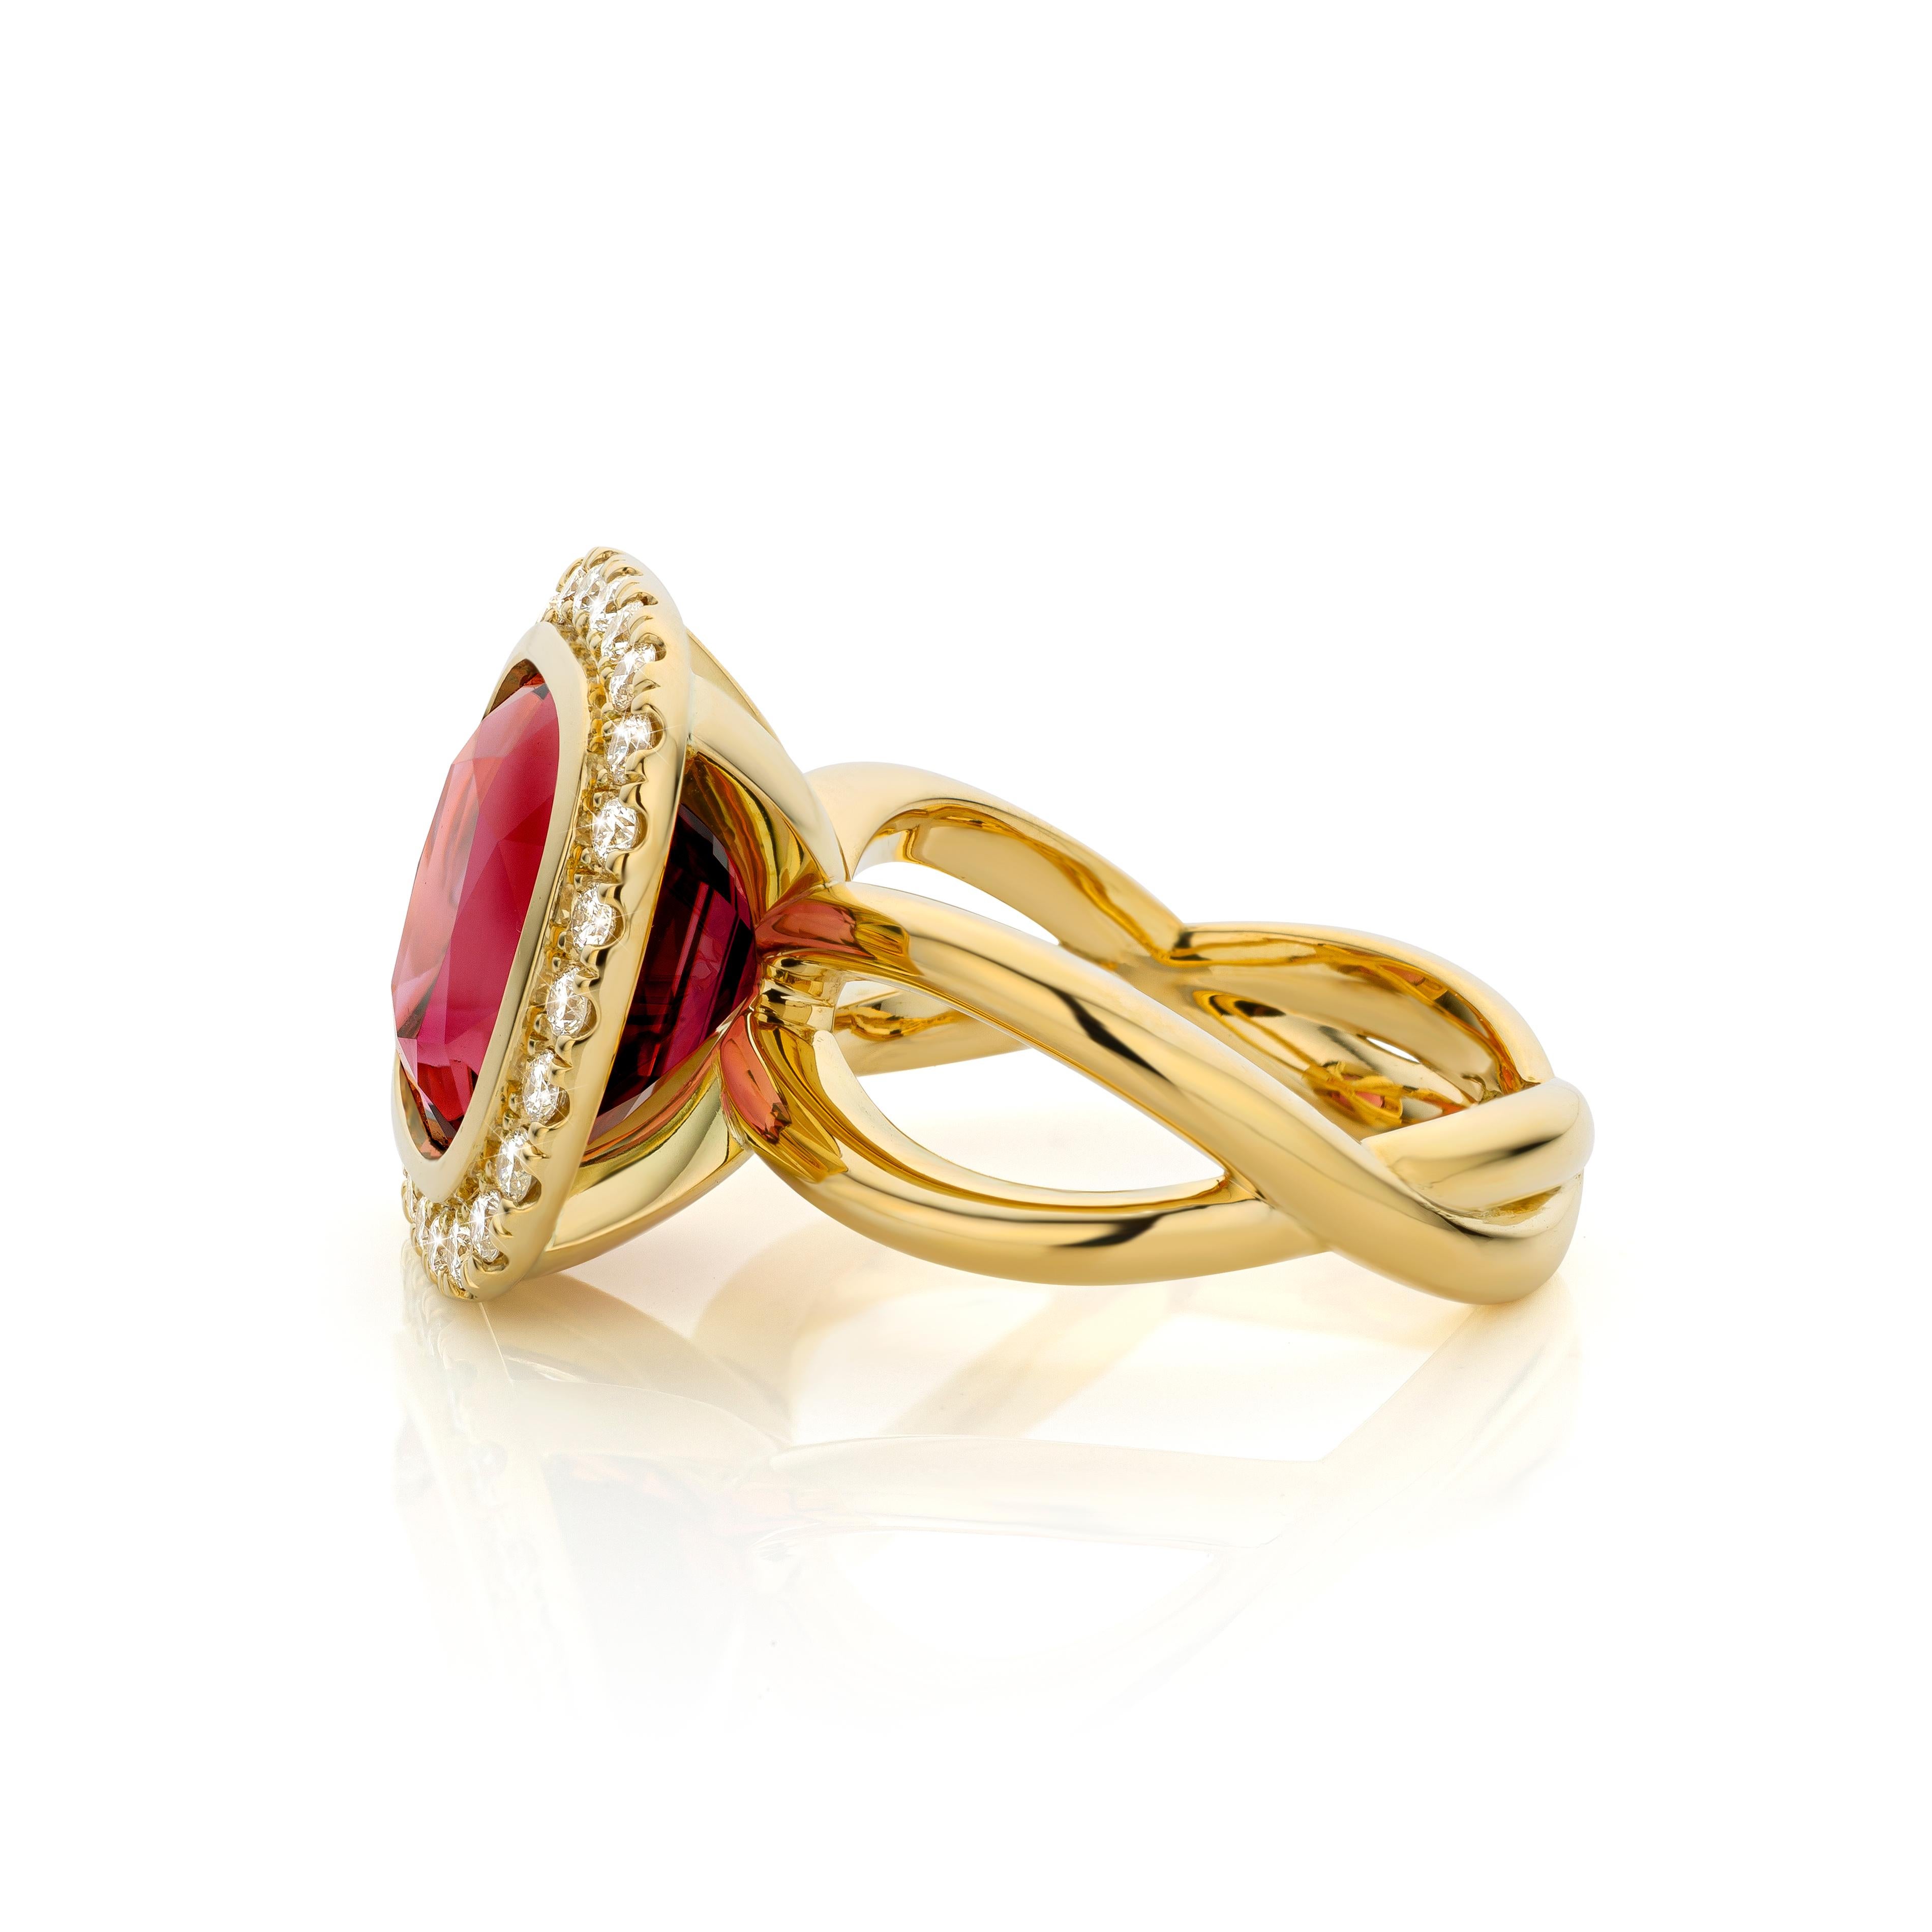 Brilliant Cut Cober “Playful Pink” with a deep pink Tourmaline and 24 Diamonds YellowGold Ring